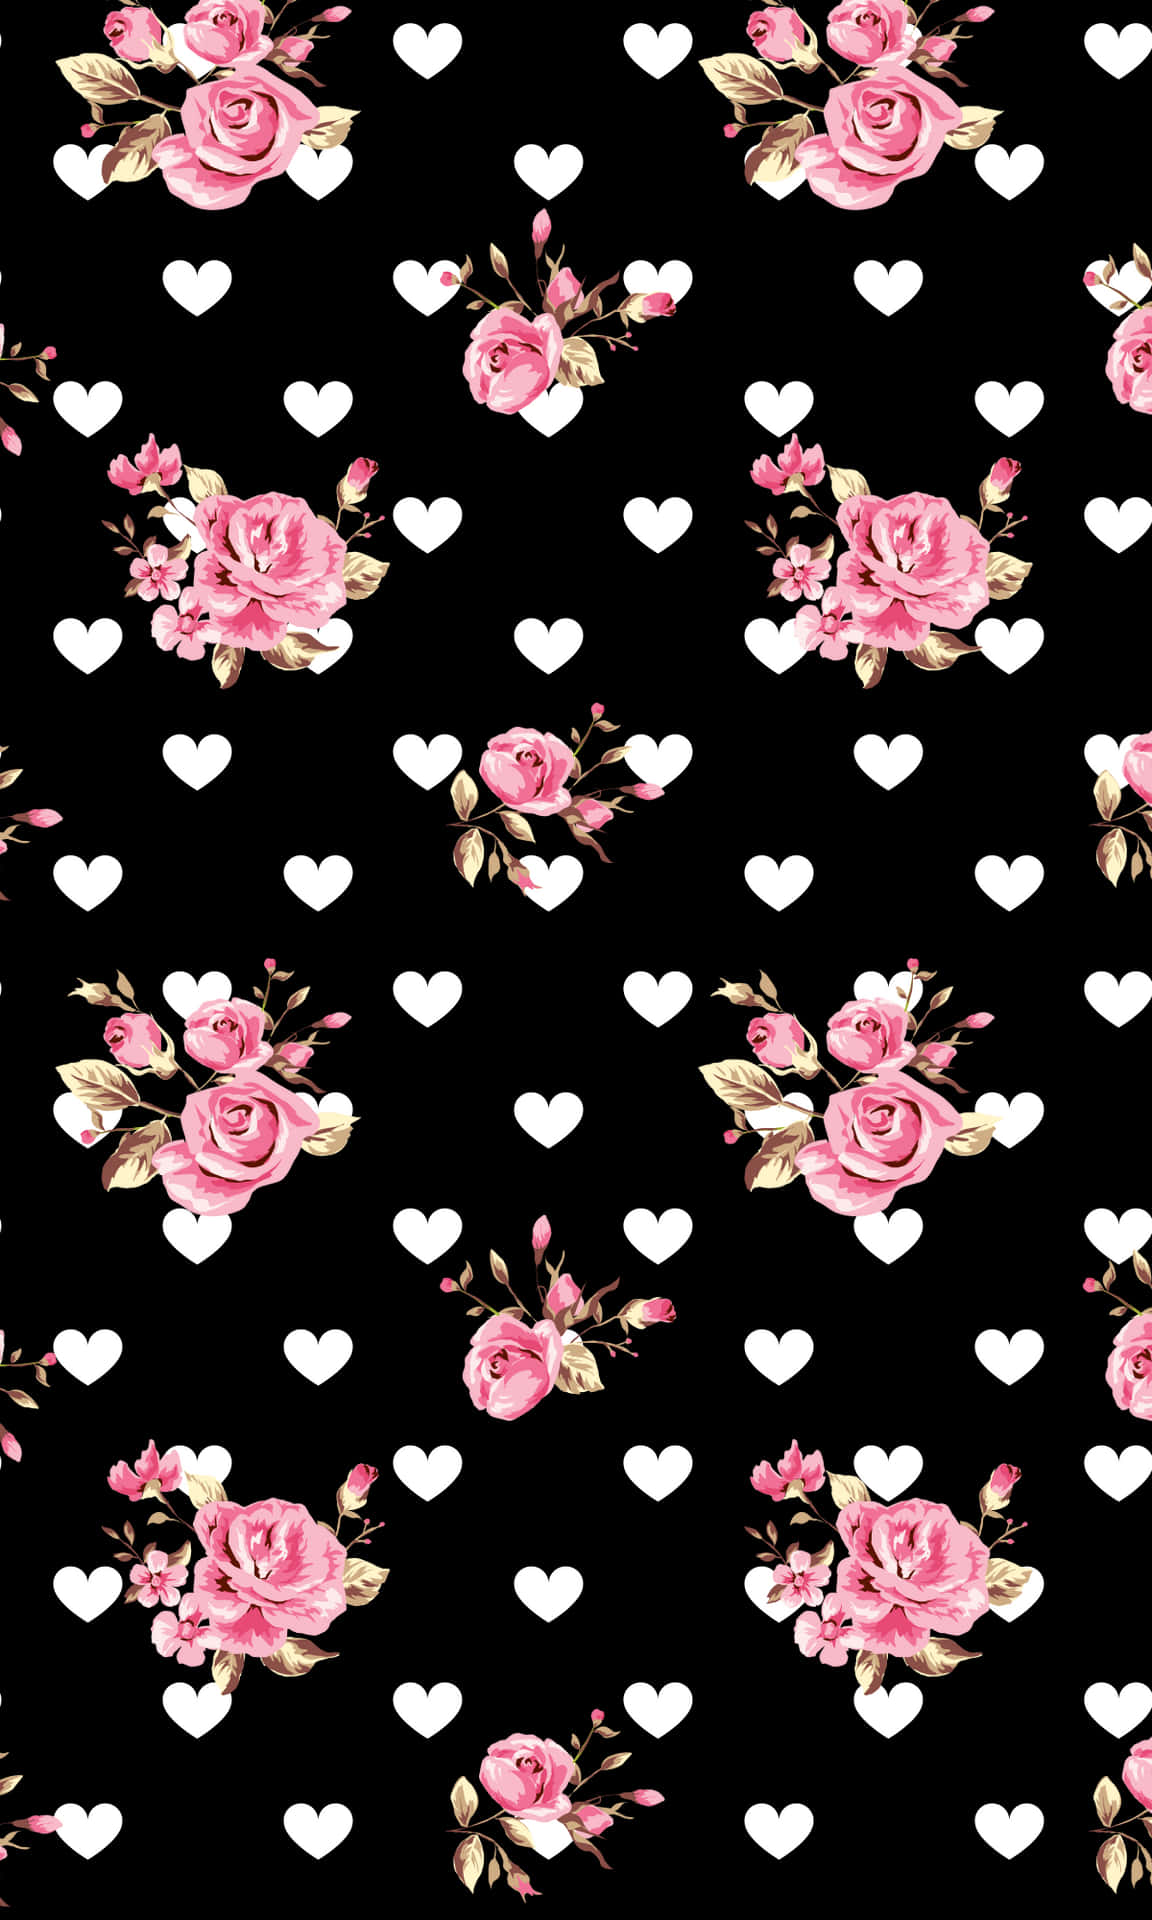 A Black And Pink Floral Pattern With Hearts Wallpaper